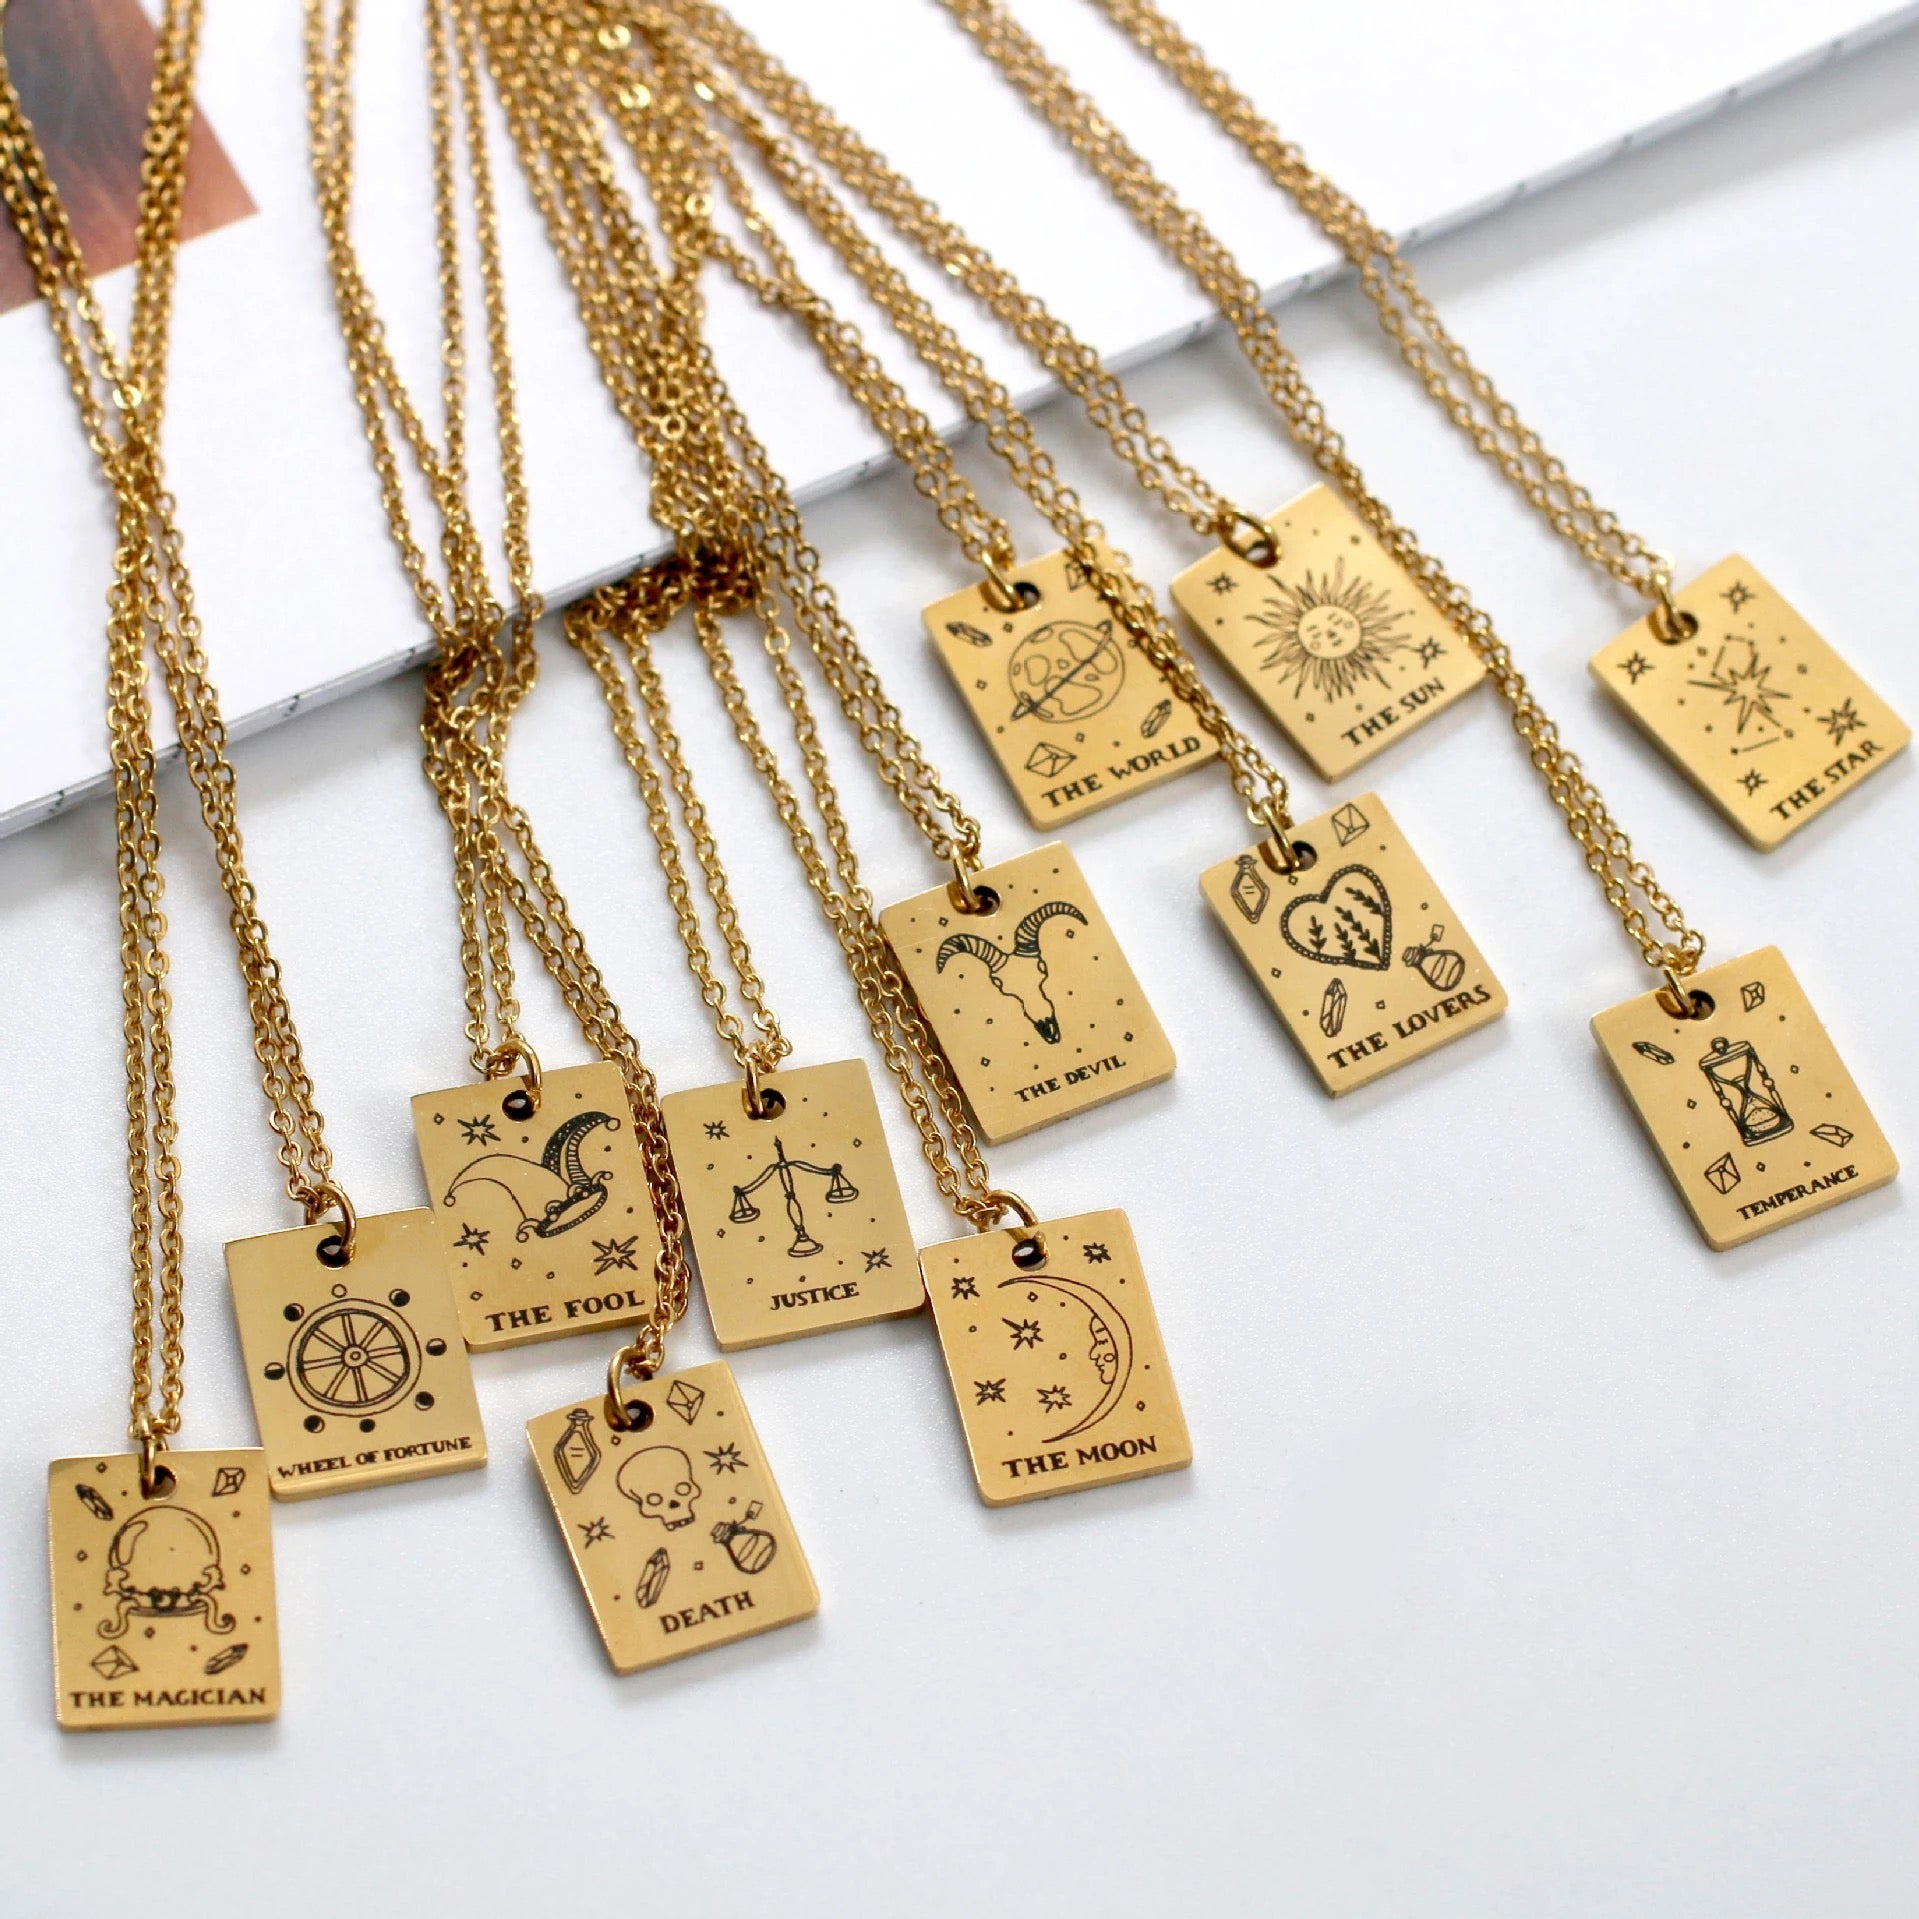 Death Tarot card necklace - Unisex gold plated necklace